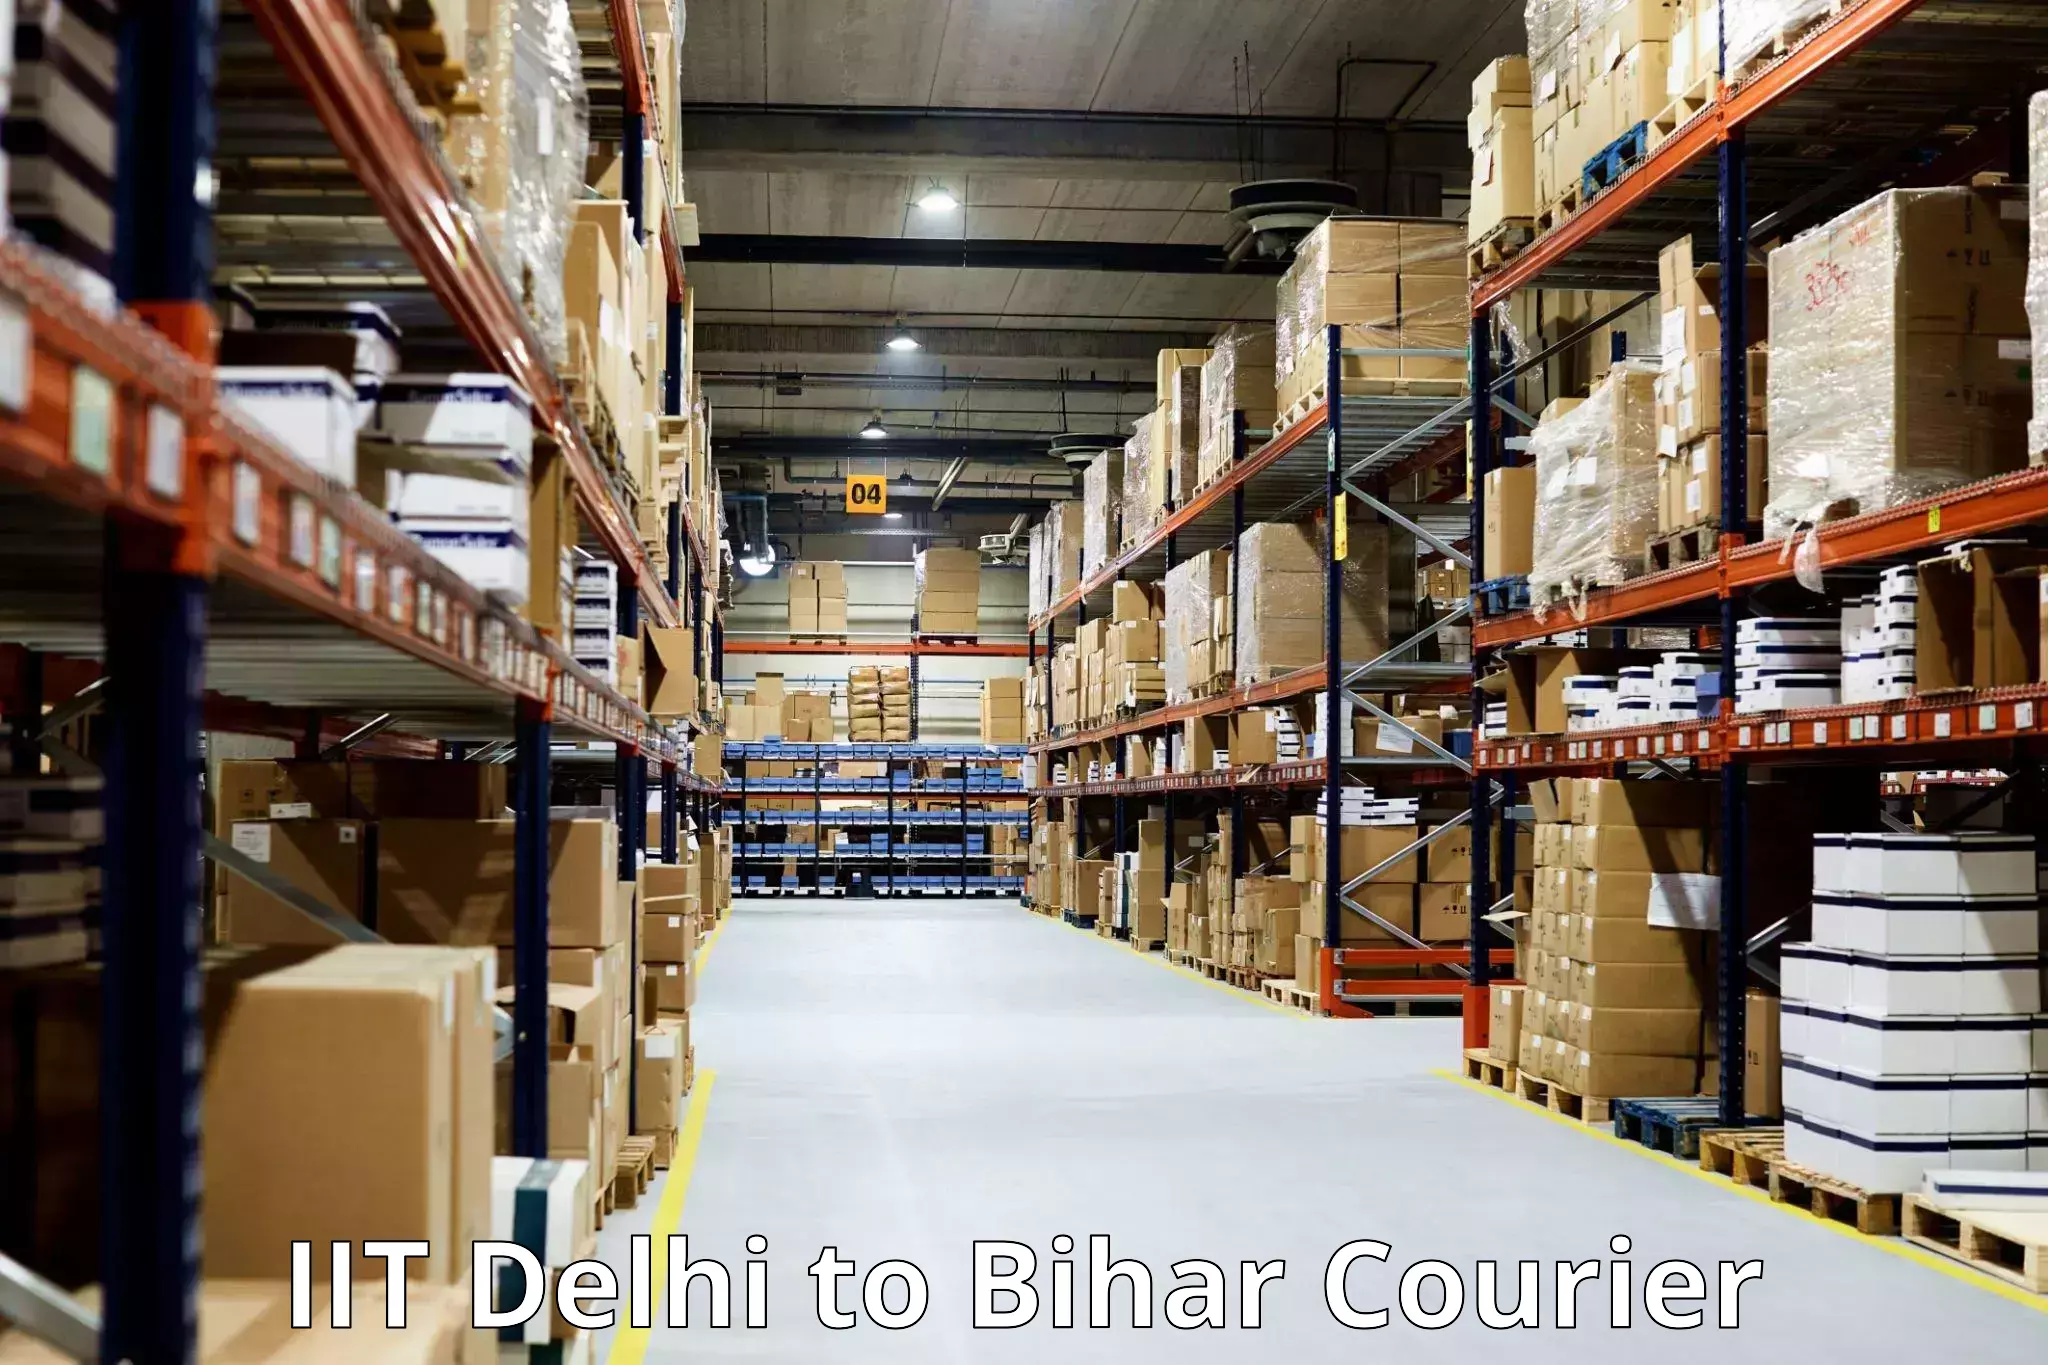 Luggage shipment specialists IIT Delhi to Bankipore